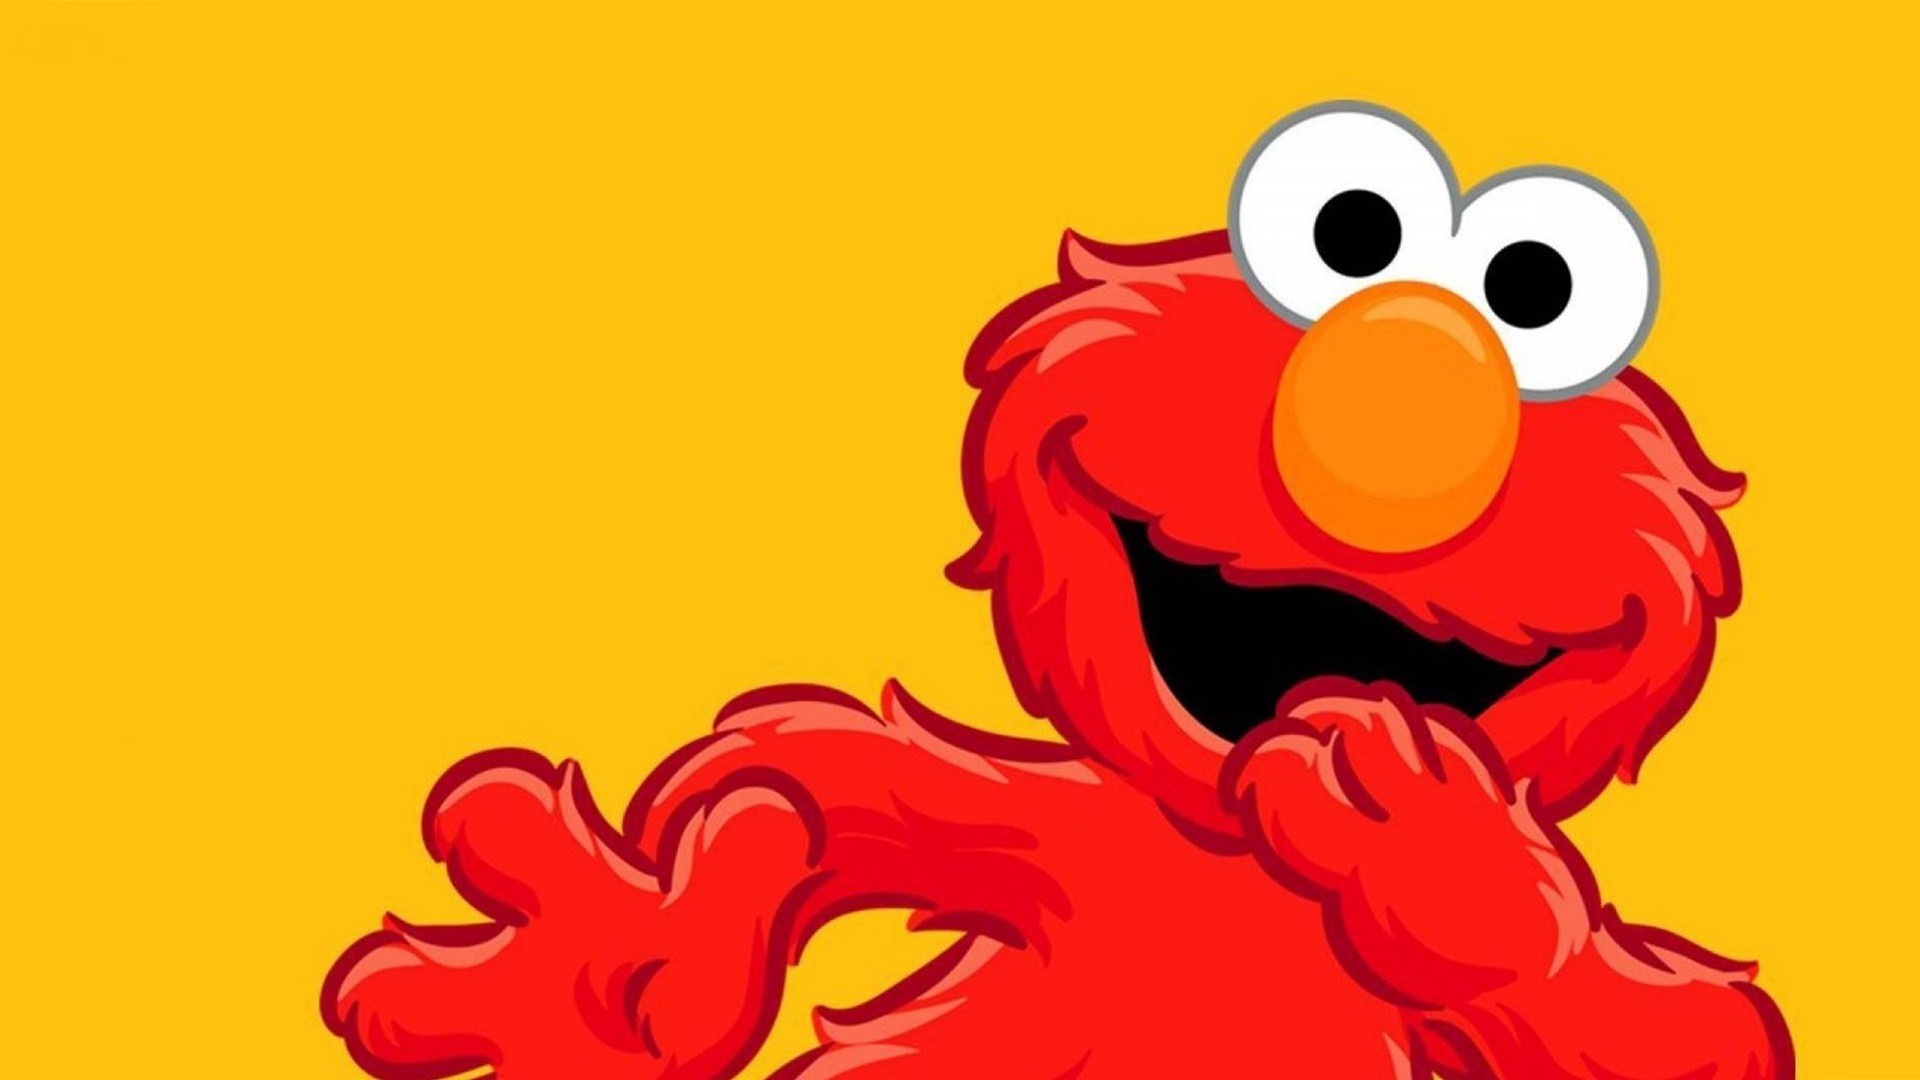 1920x1080 Elmo And Cookie Monster Wallpaper